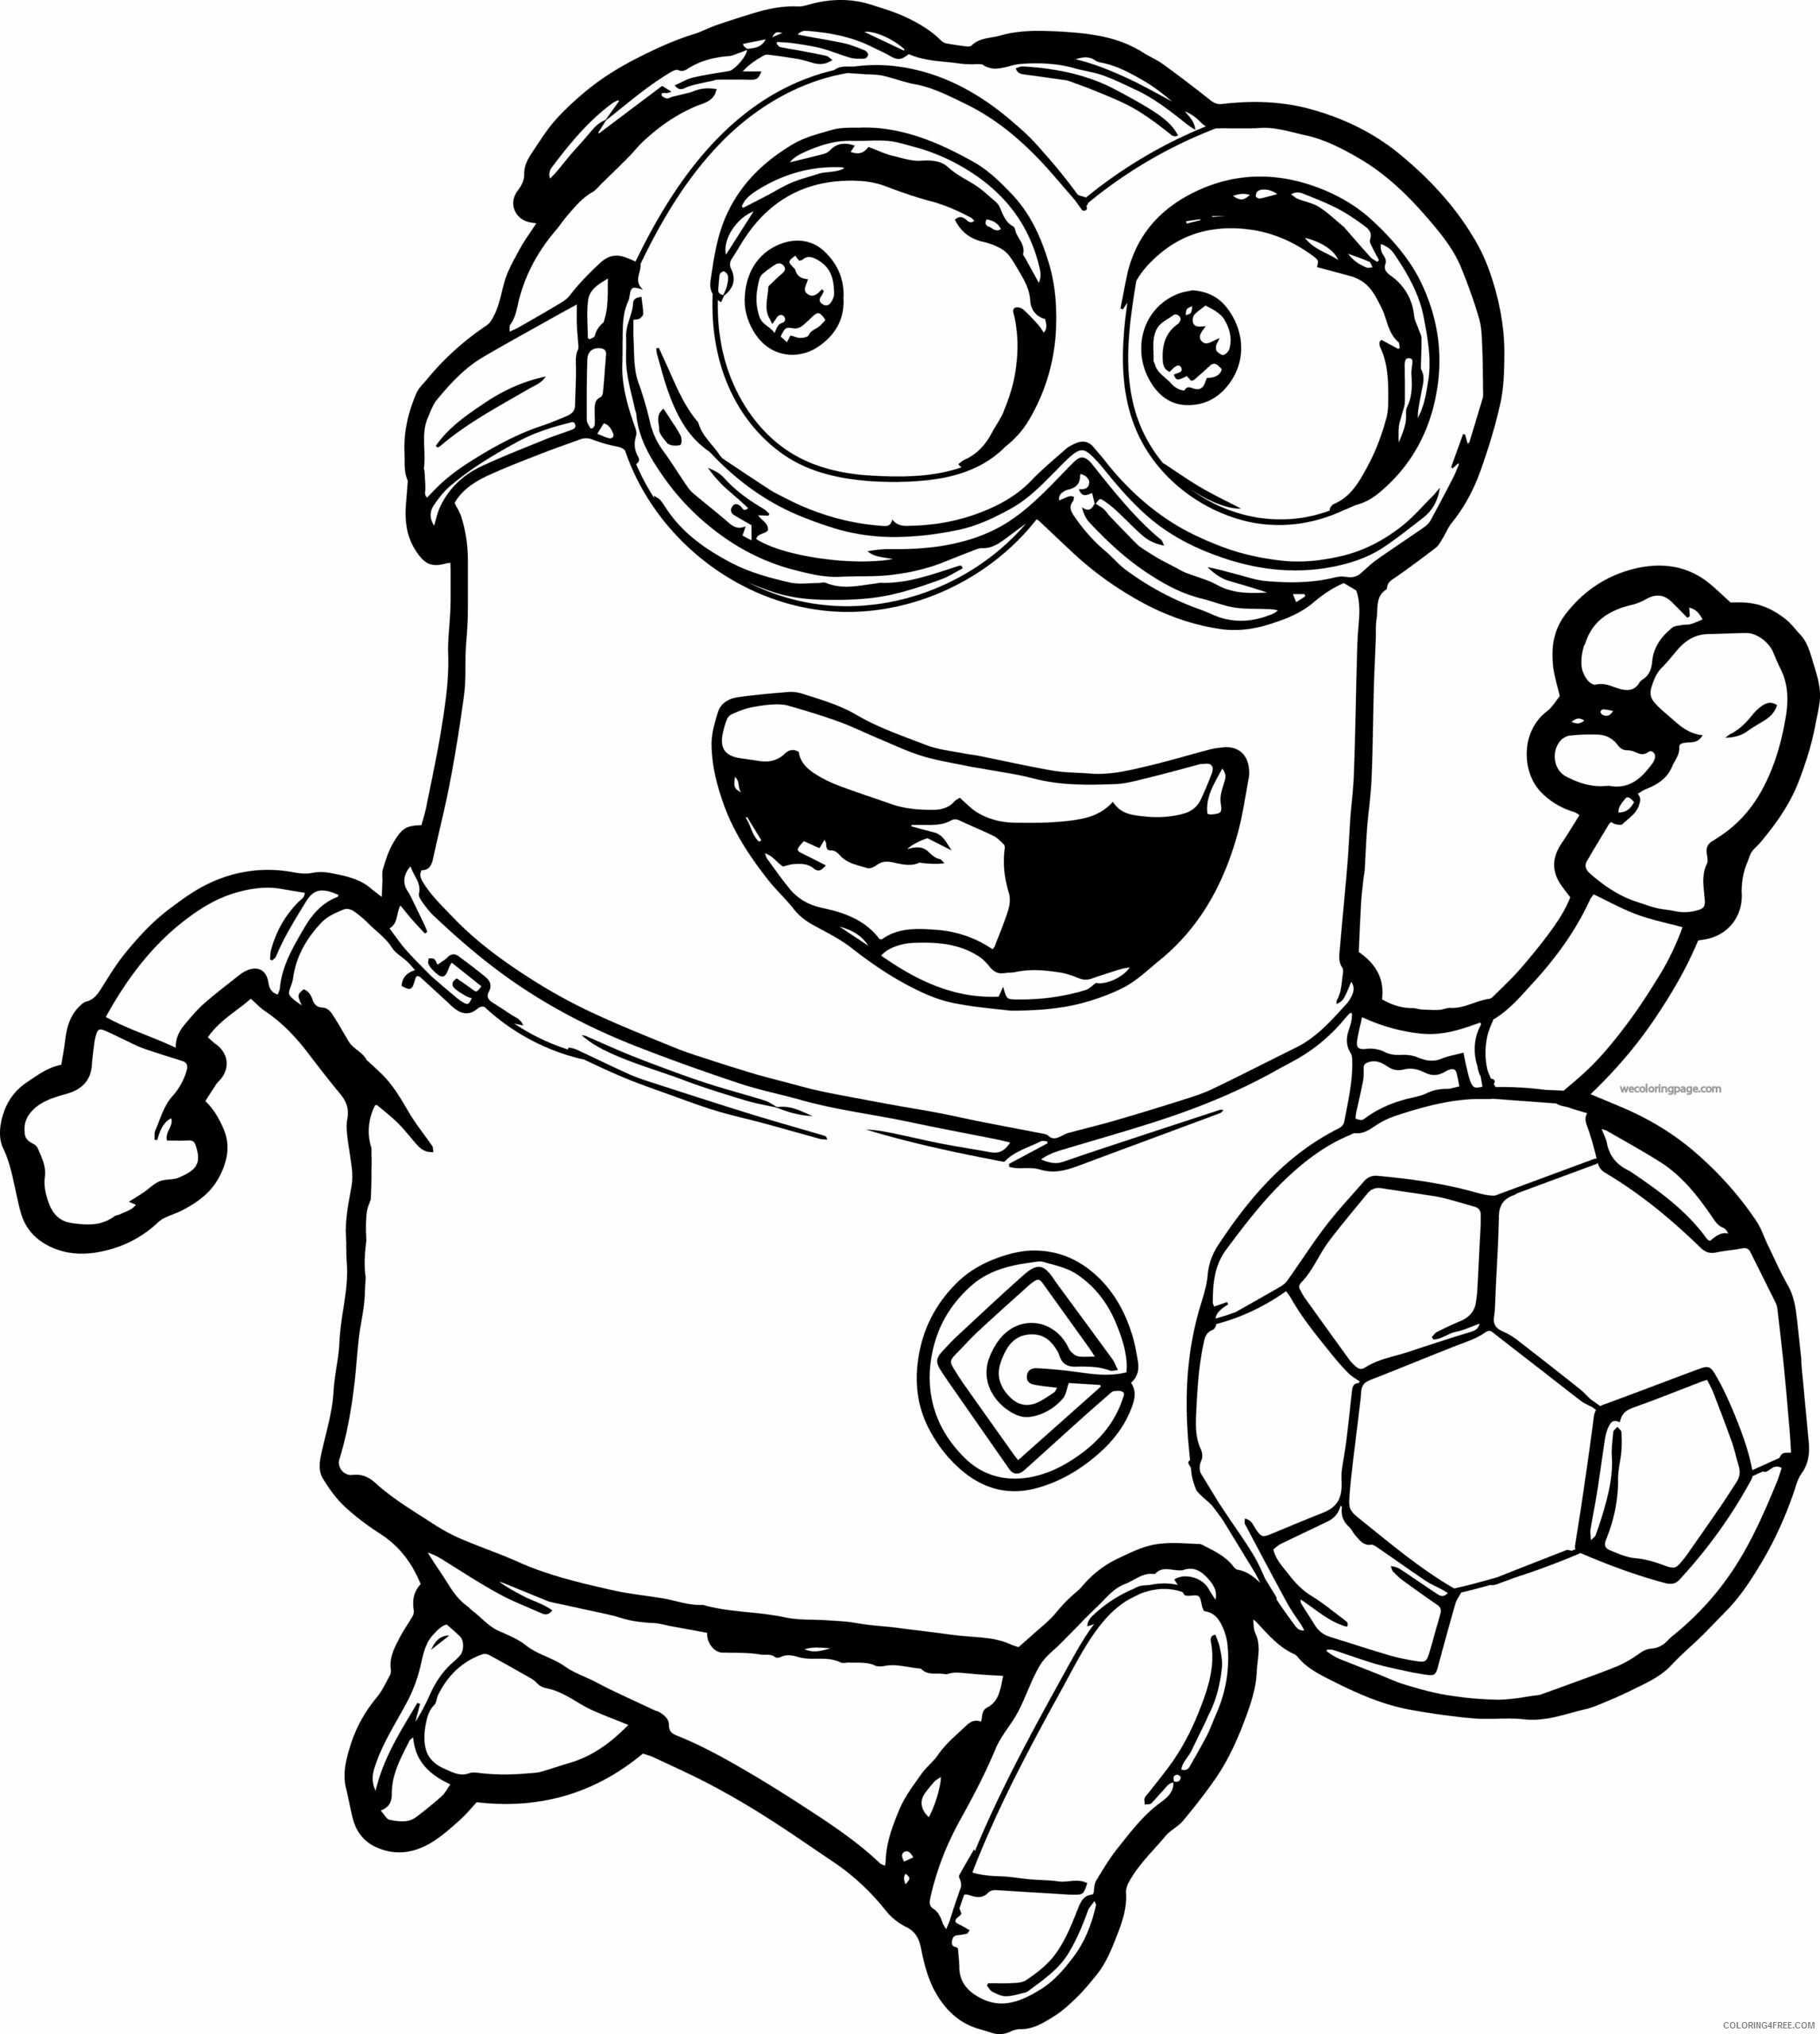 Minions Coloring Pages TV Film Download Free Minion Printable 2020 05179 Coloring4free